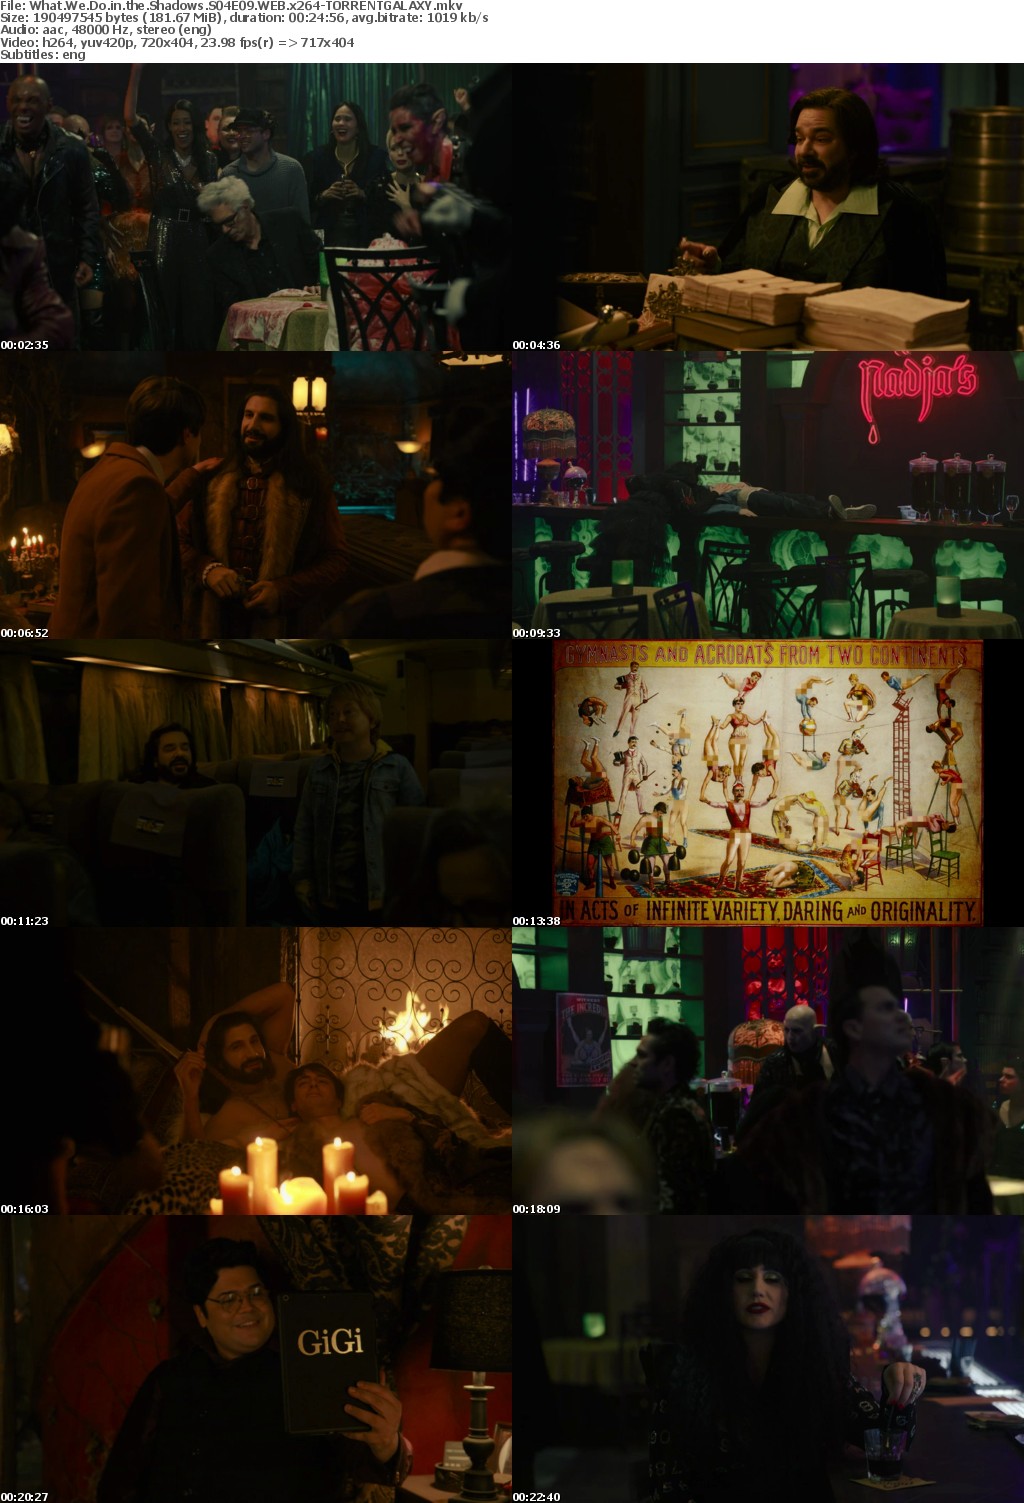 What We Do in the Shadows S04E09 WEB x264-GALAXY